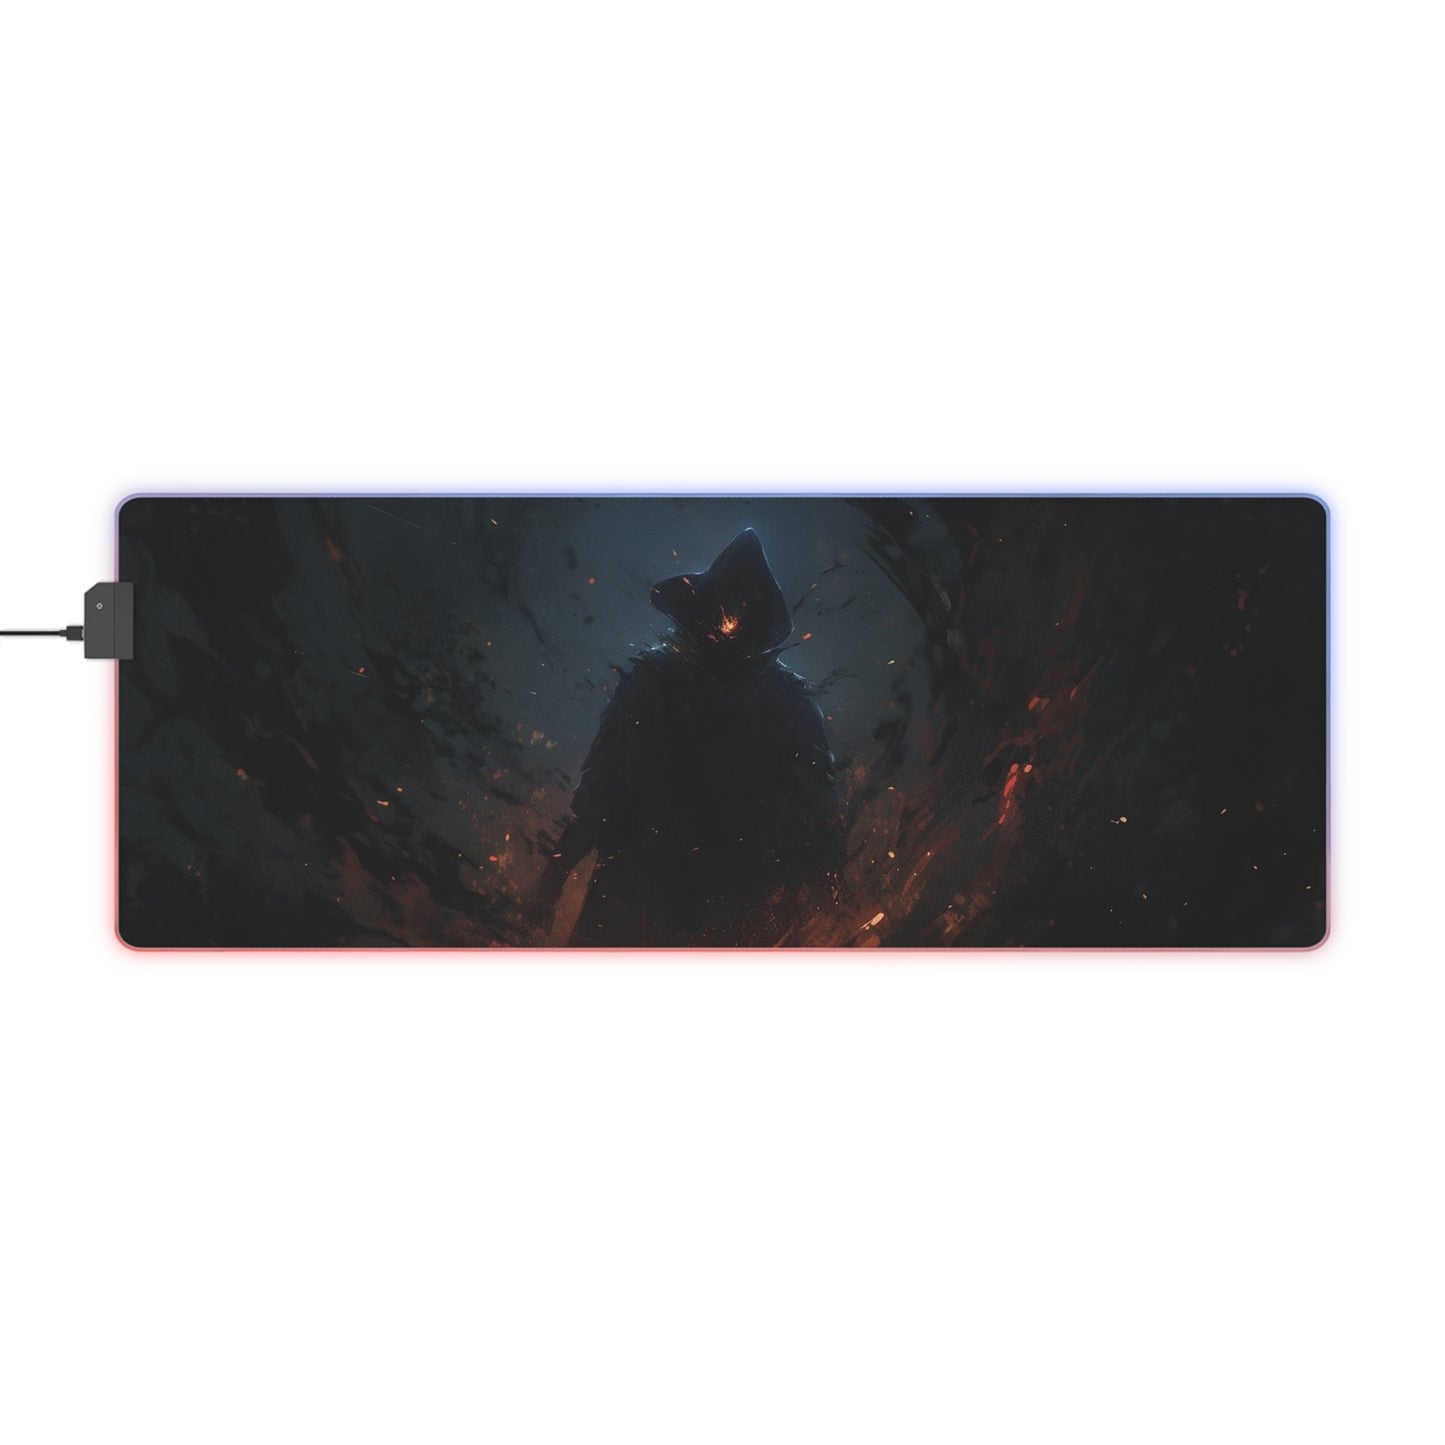 CLMP-1 LED Gaming Mouse Pad